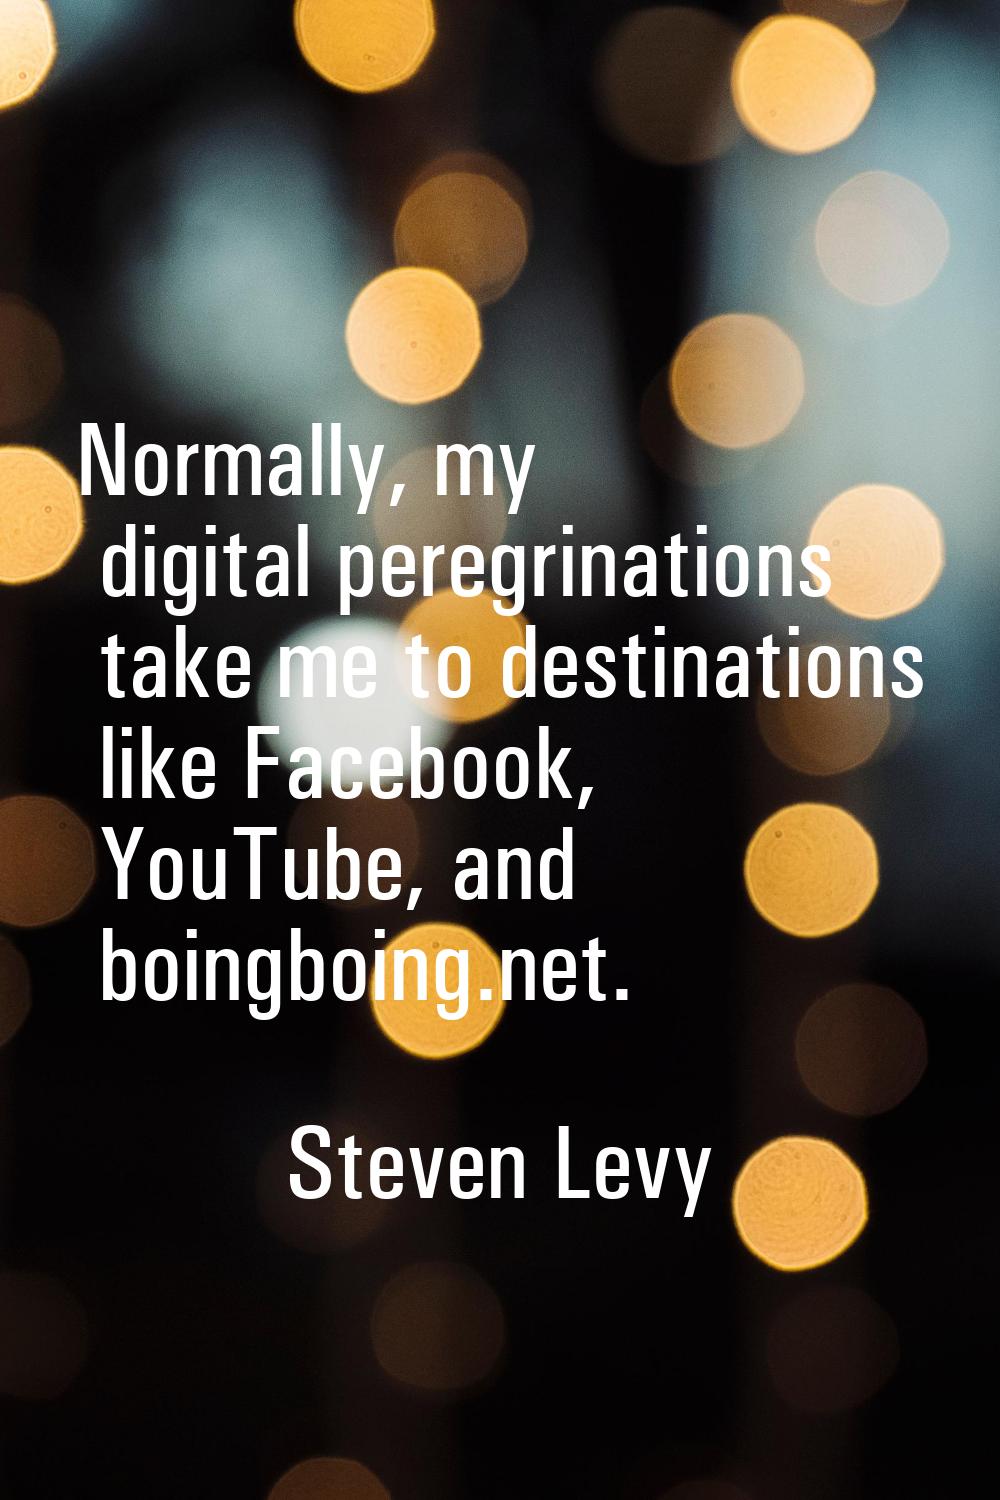 Normally, my digital peregrinations take me to destinations like Facebook, YouTube, and boingboing.